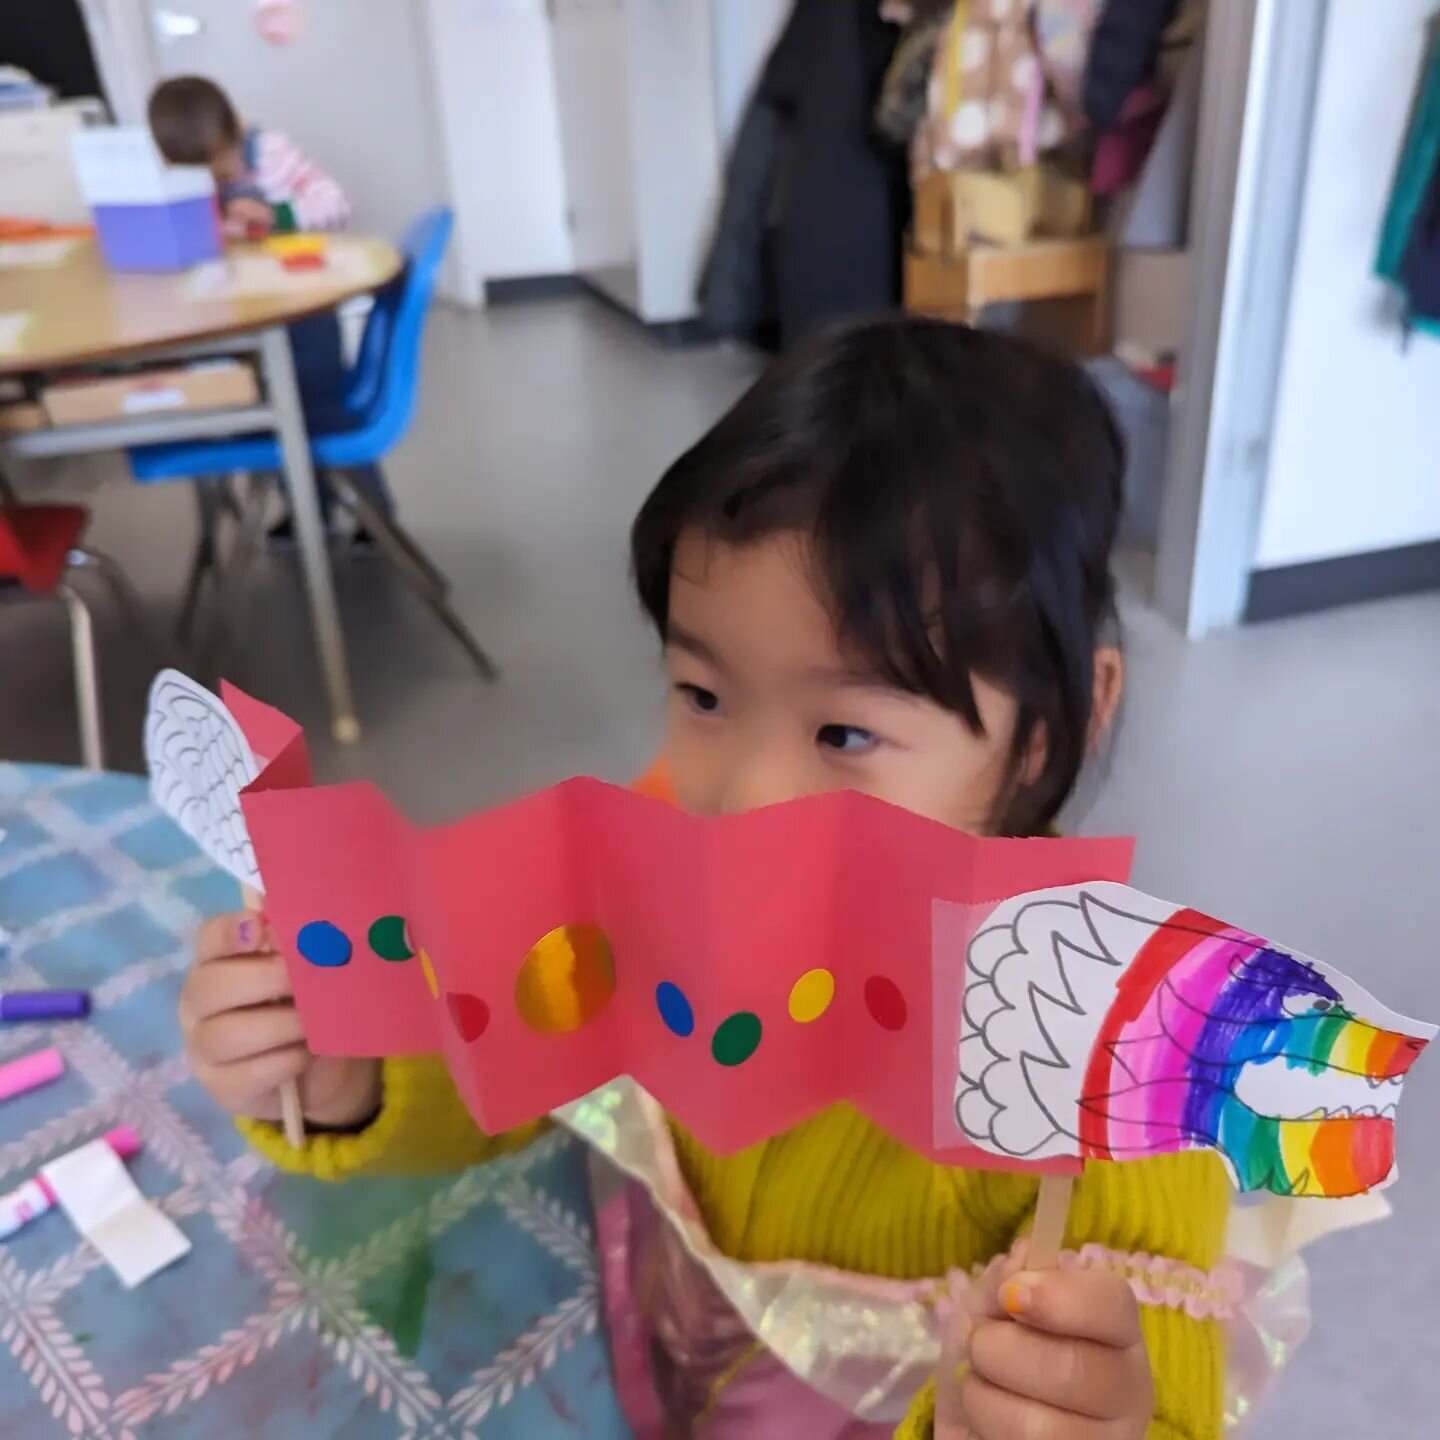 Getting ready for Lunar New Year with these dragon puppets!
#preschoolart #yearofthedragon